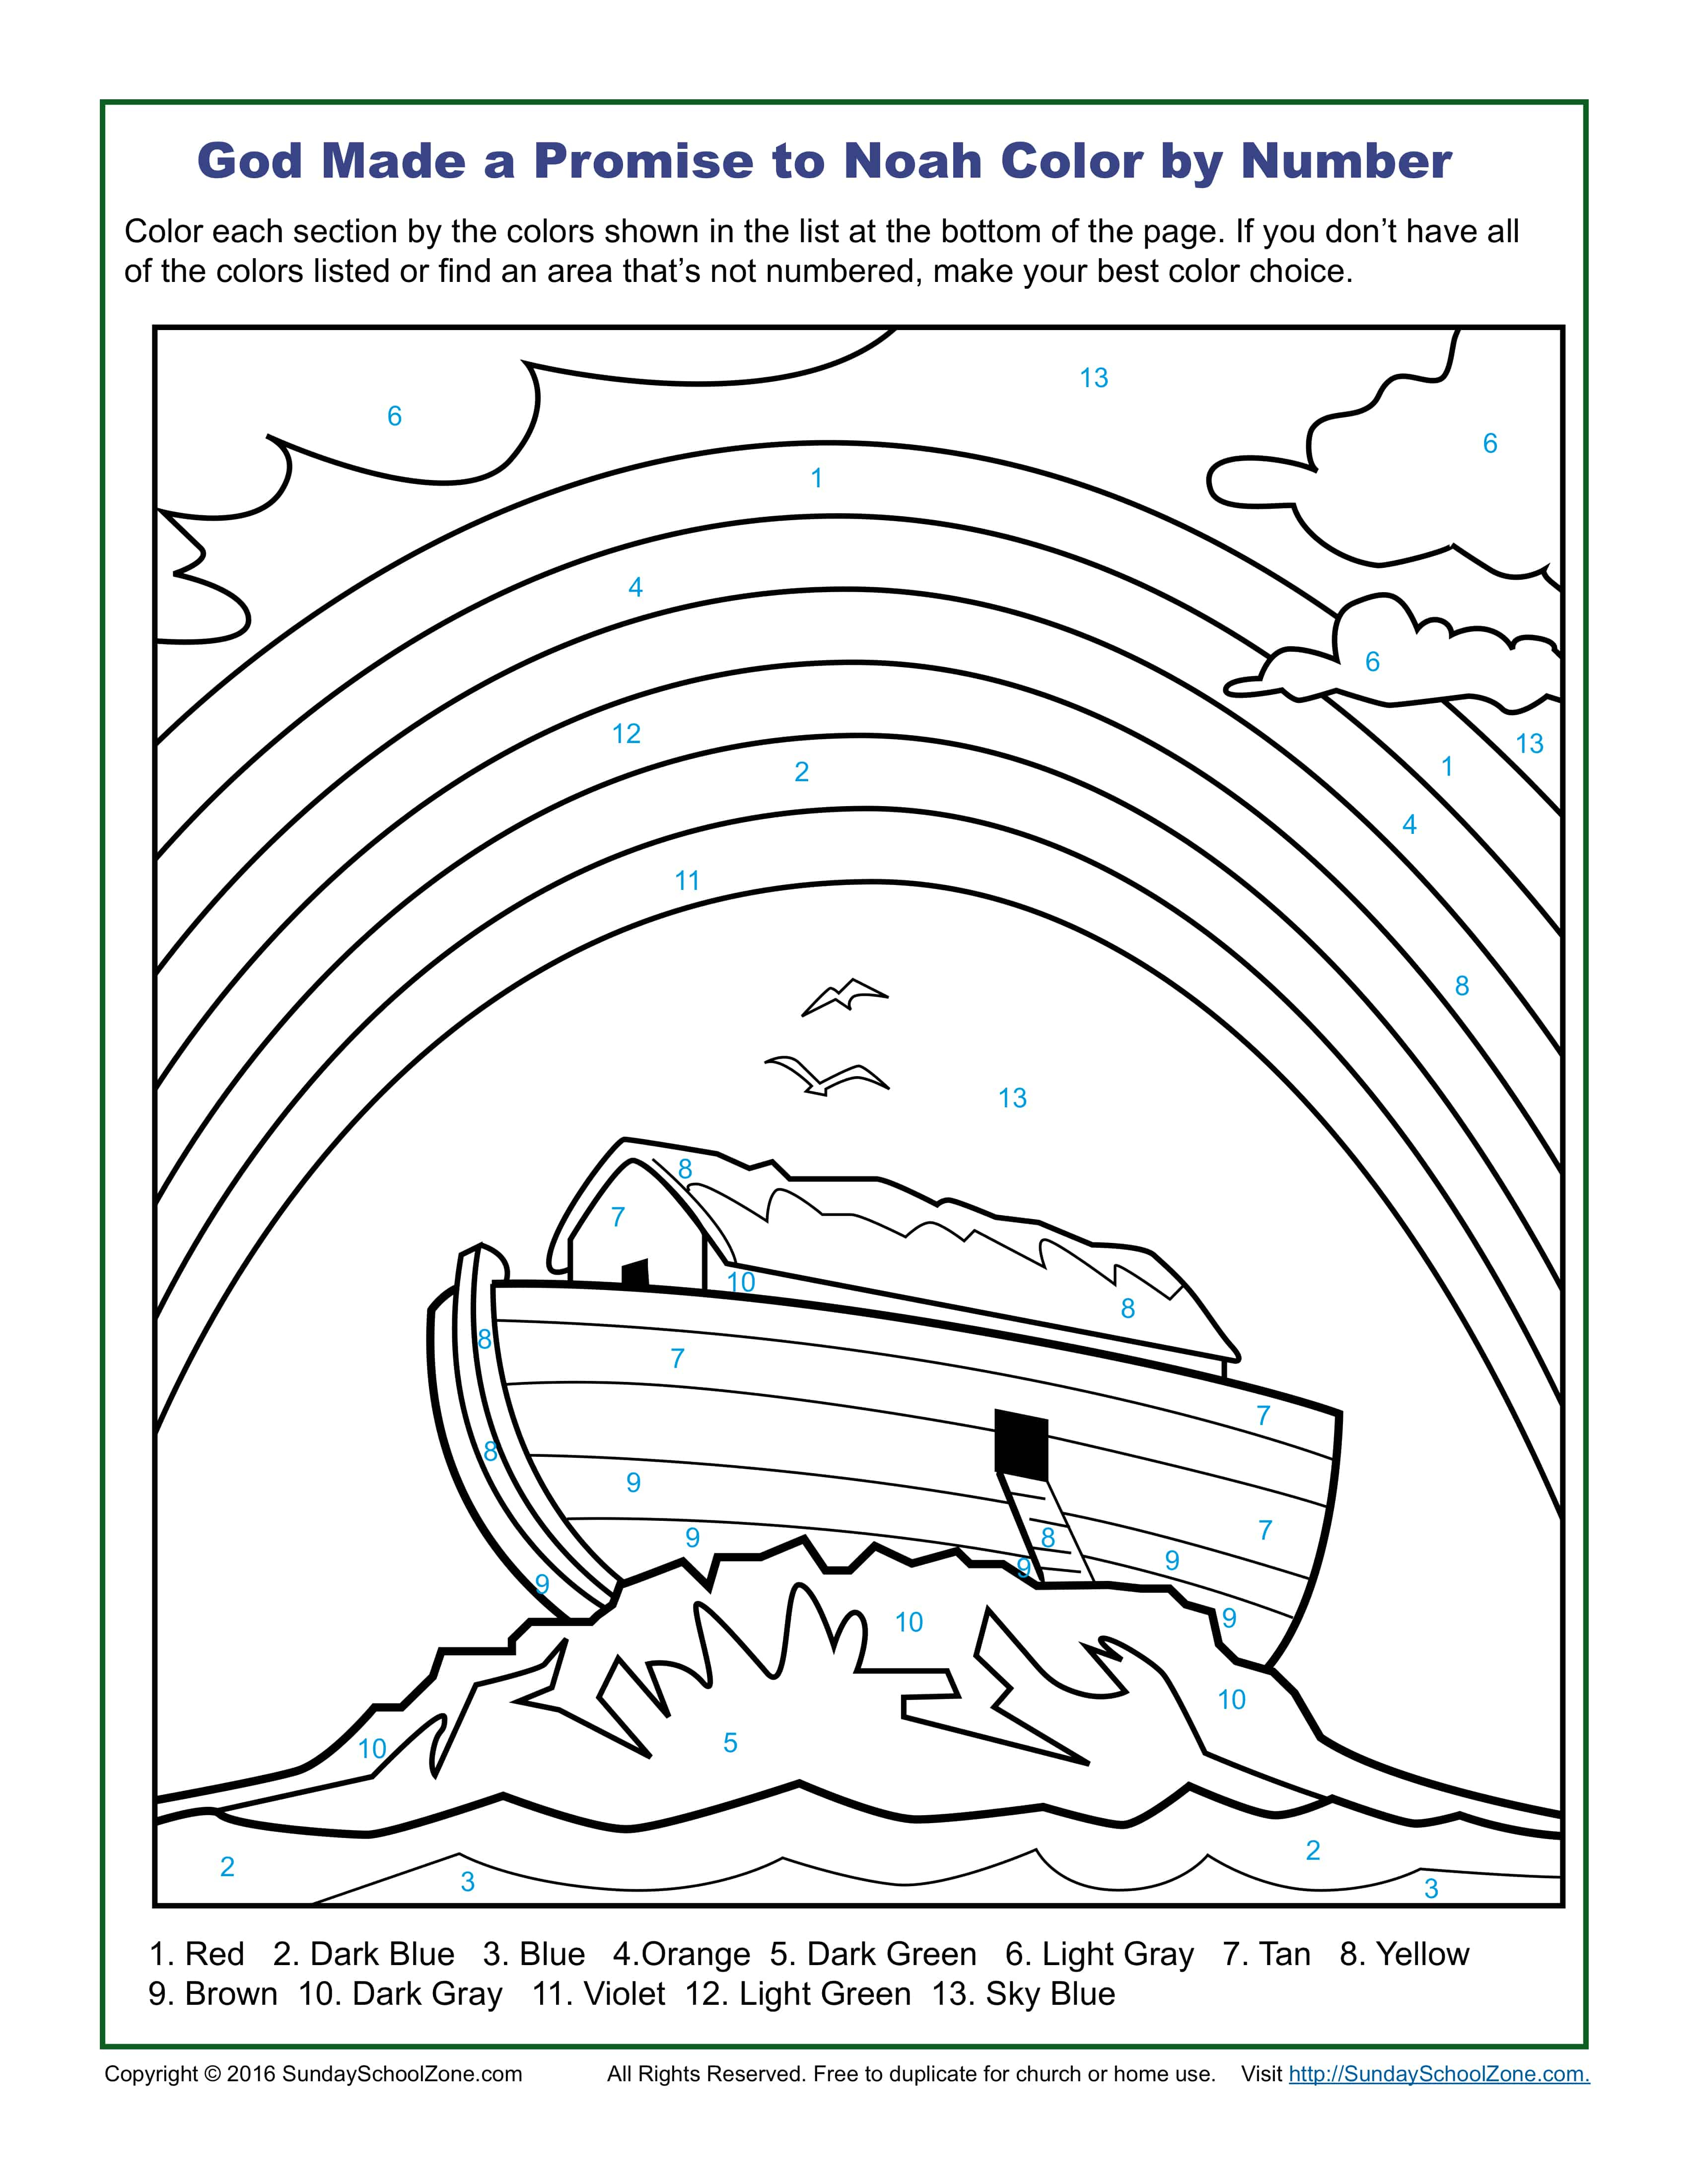 Colors Coloring Pages Color Number Bible Coloring Pages On Sunday School Zone